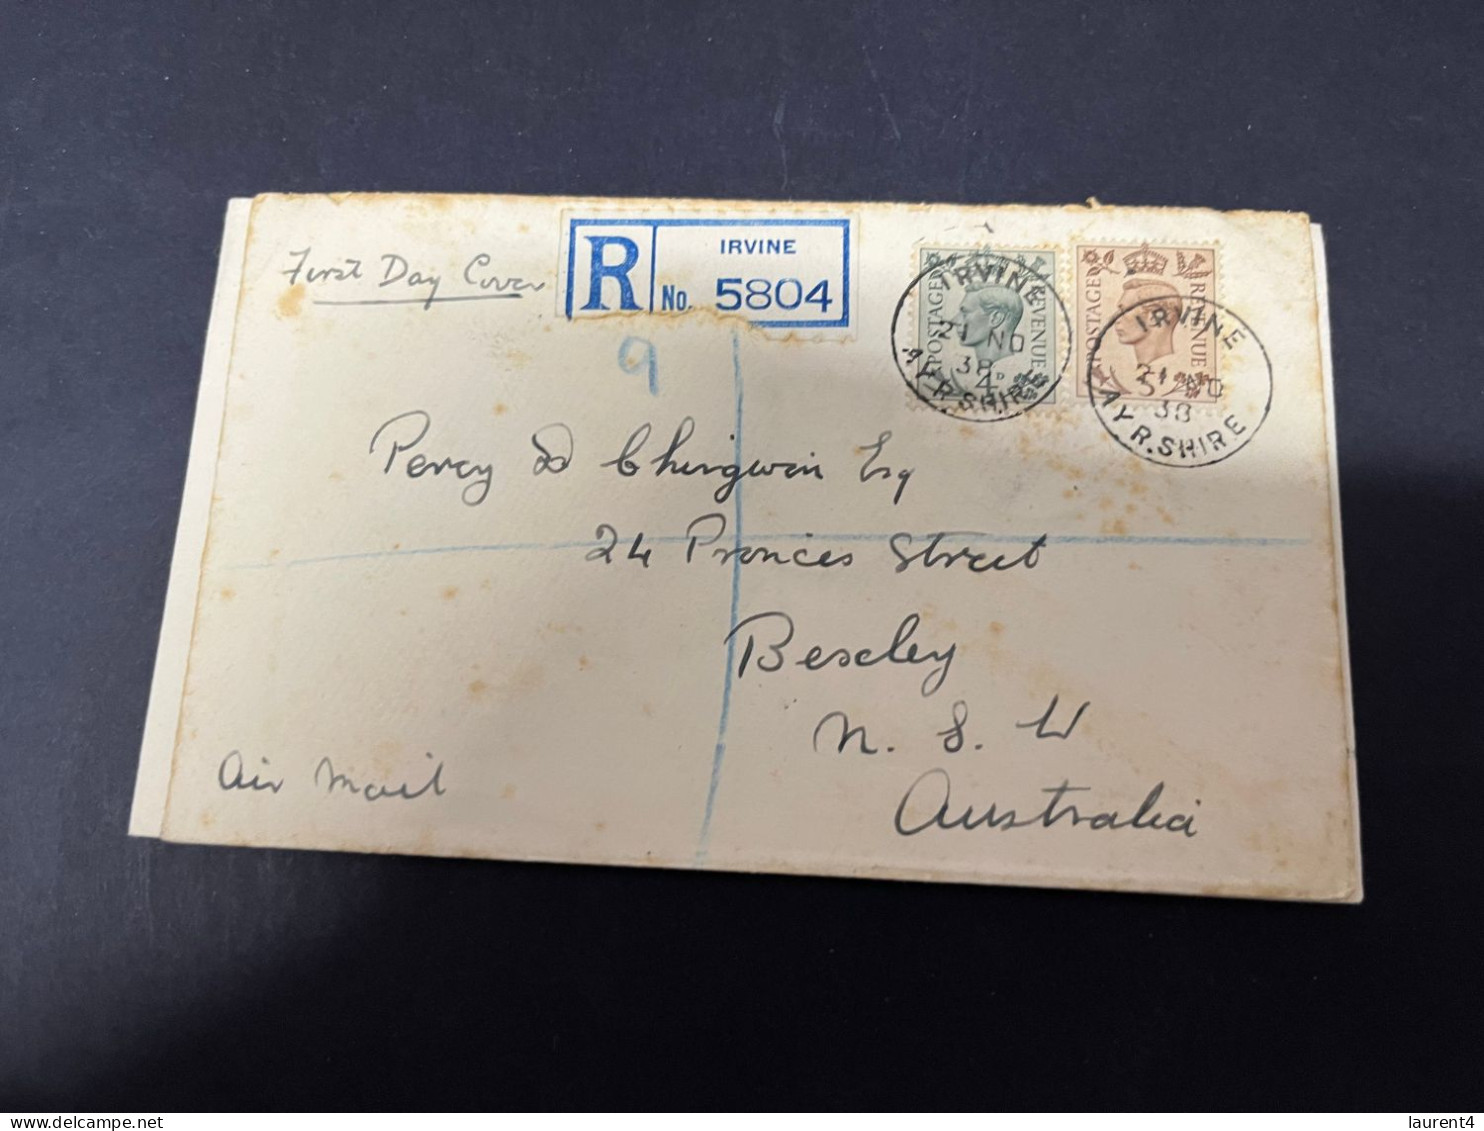 7-11-2023 (1 V 34) UK (registered) Letter Posted To Australia (1938) (condition As Seen On Scan) - Covers & Documents